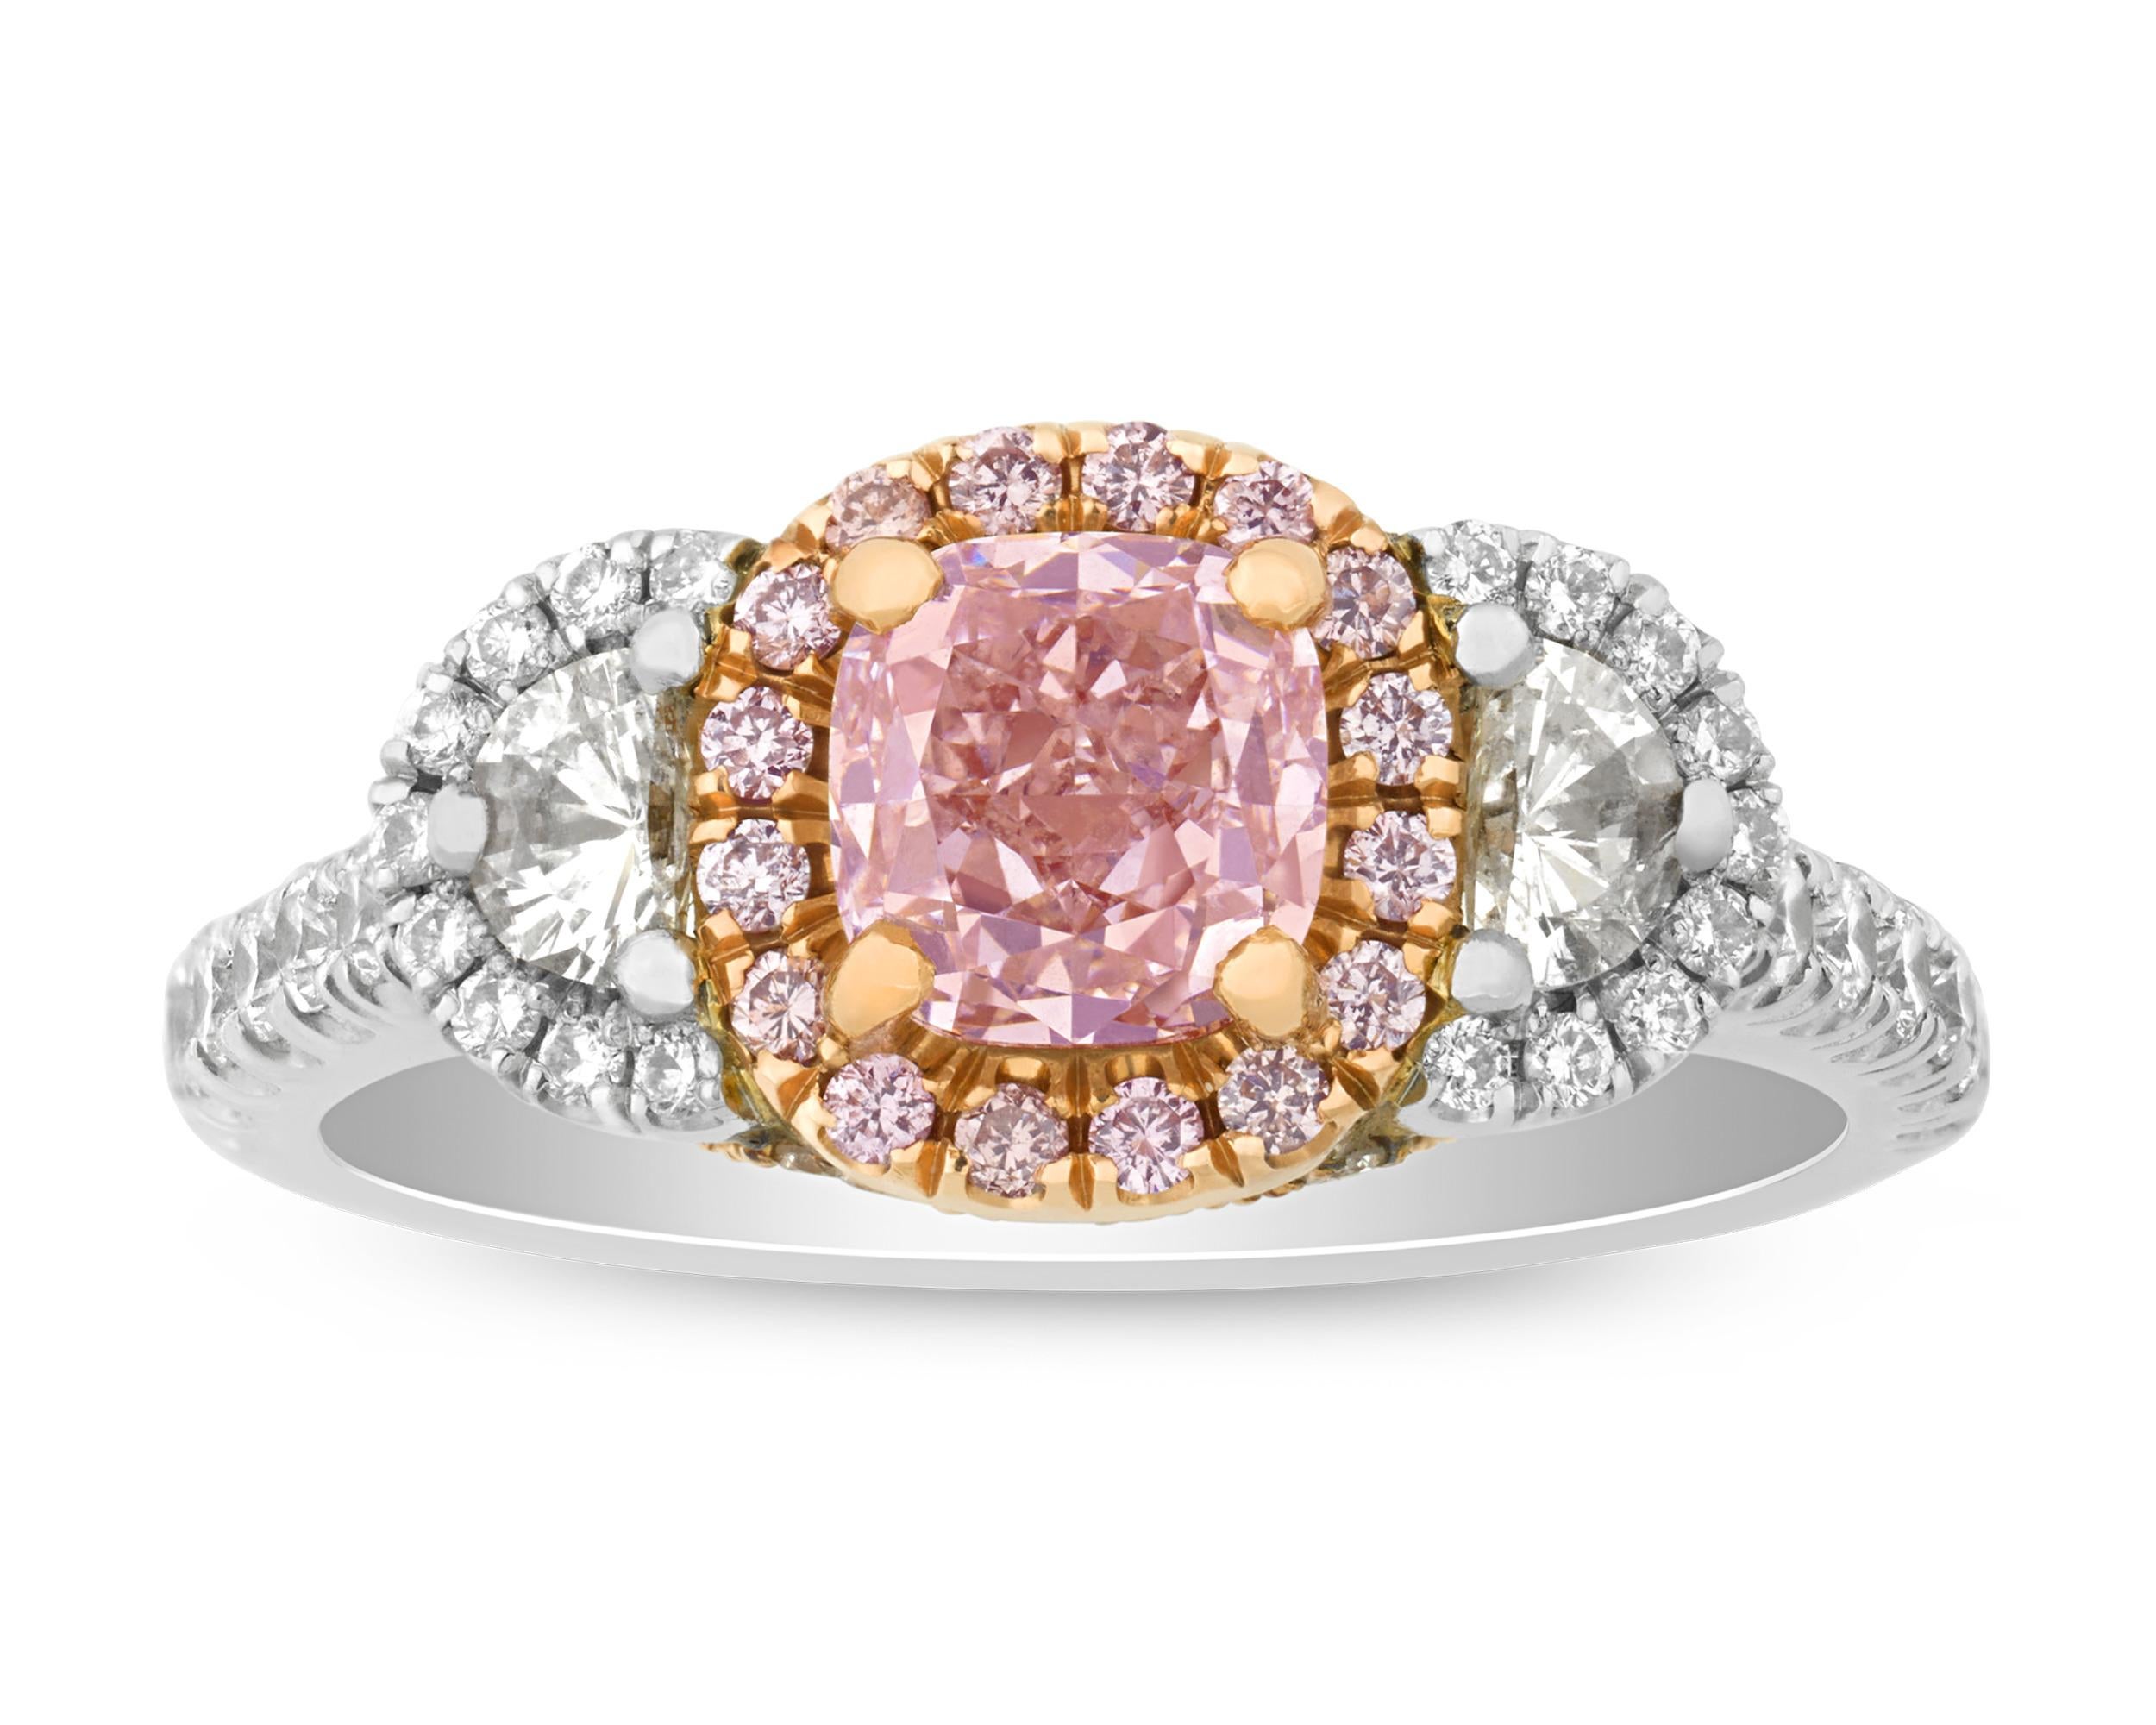 Cushion Cut Fancy Pink Diamond Ring, 1.02 Carats For Sale